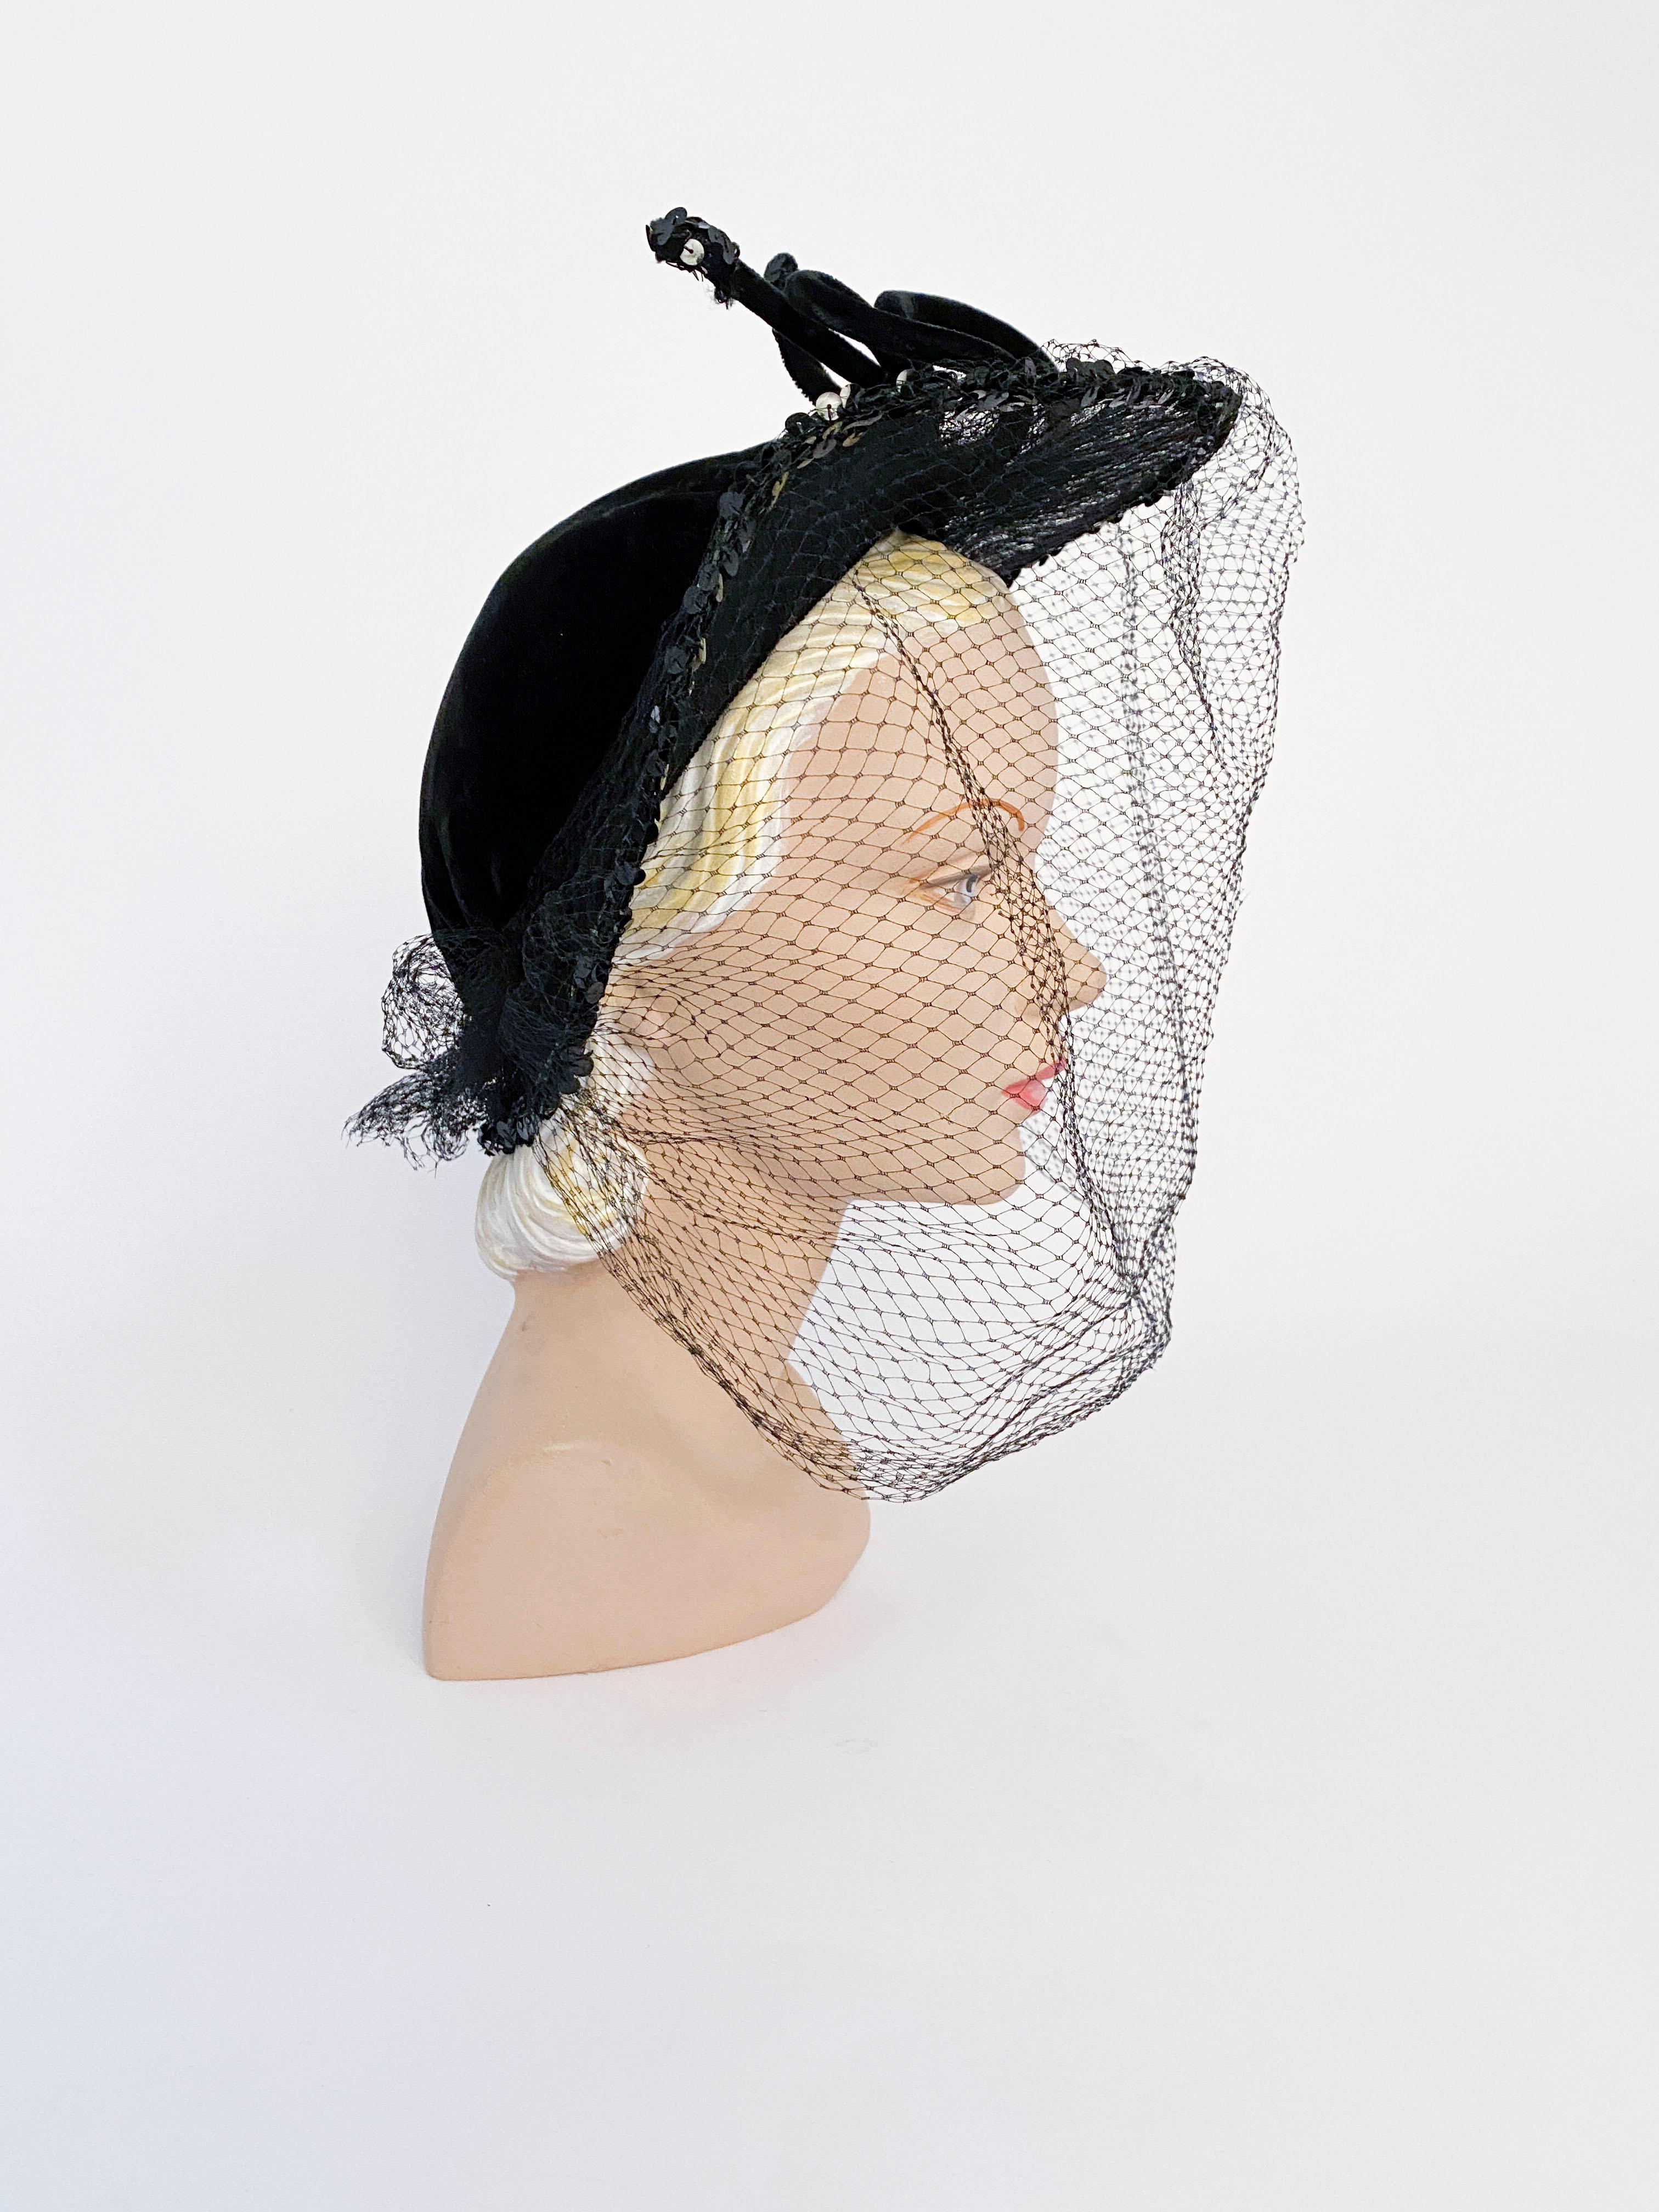 hats with lace over face